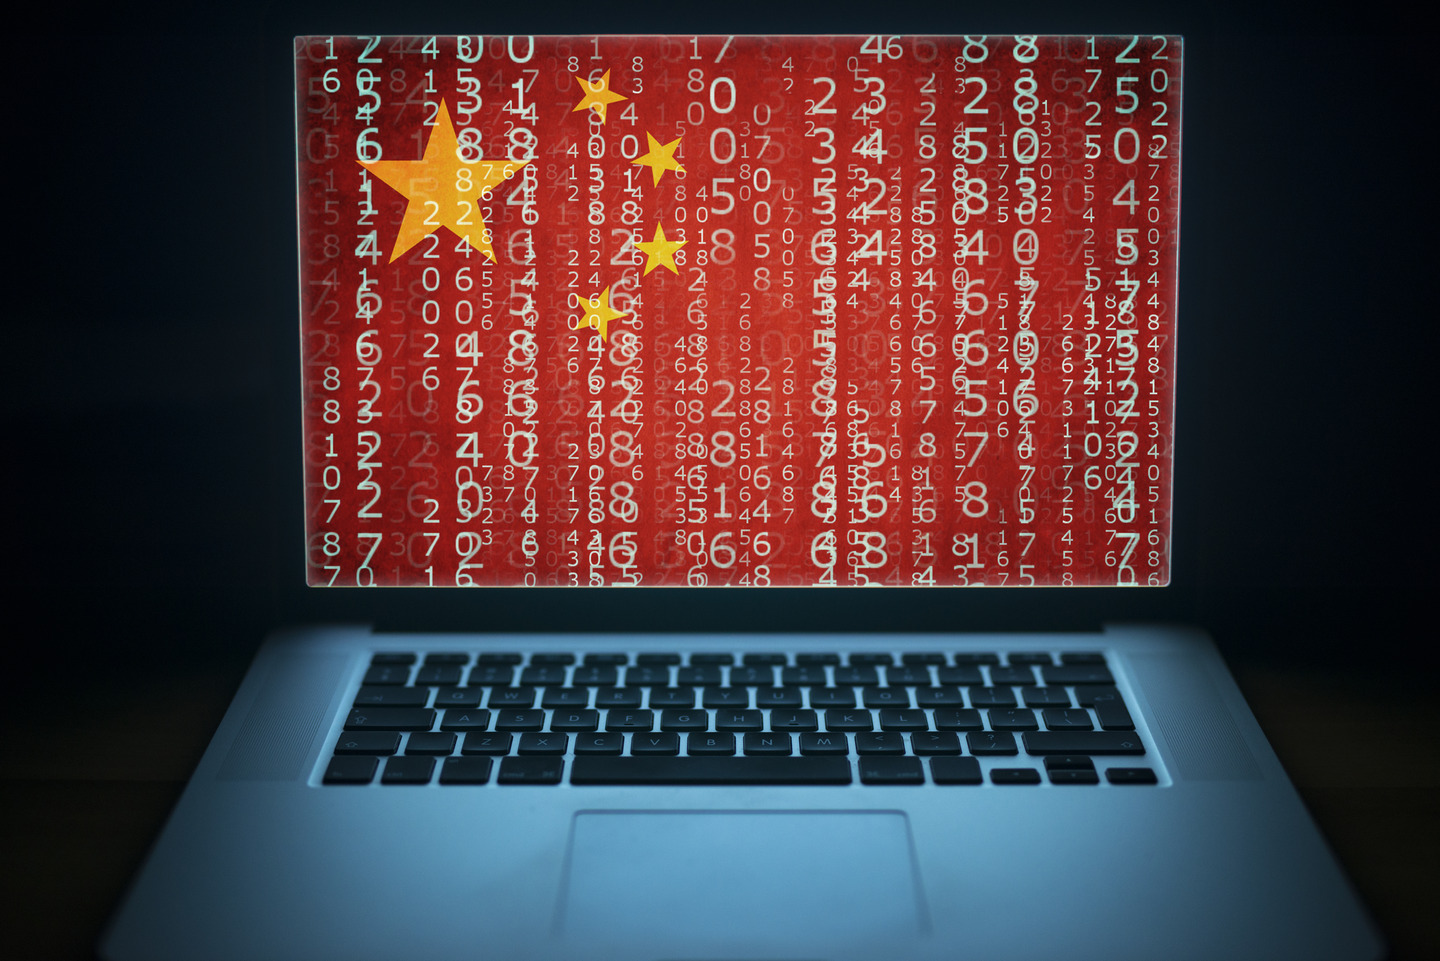 China is the source of most state-sponsored cyberattack.